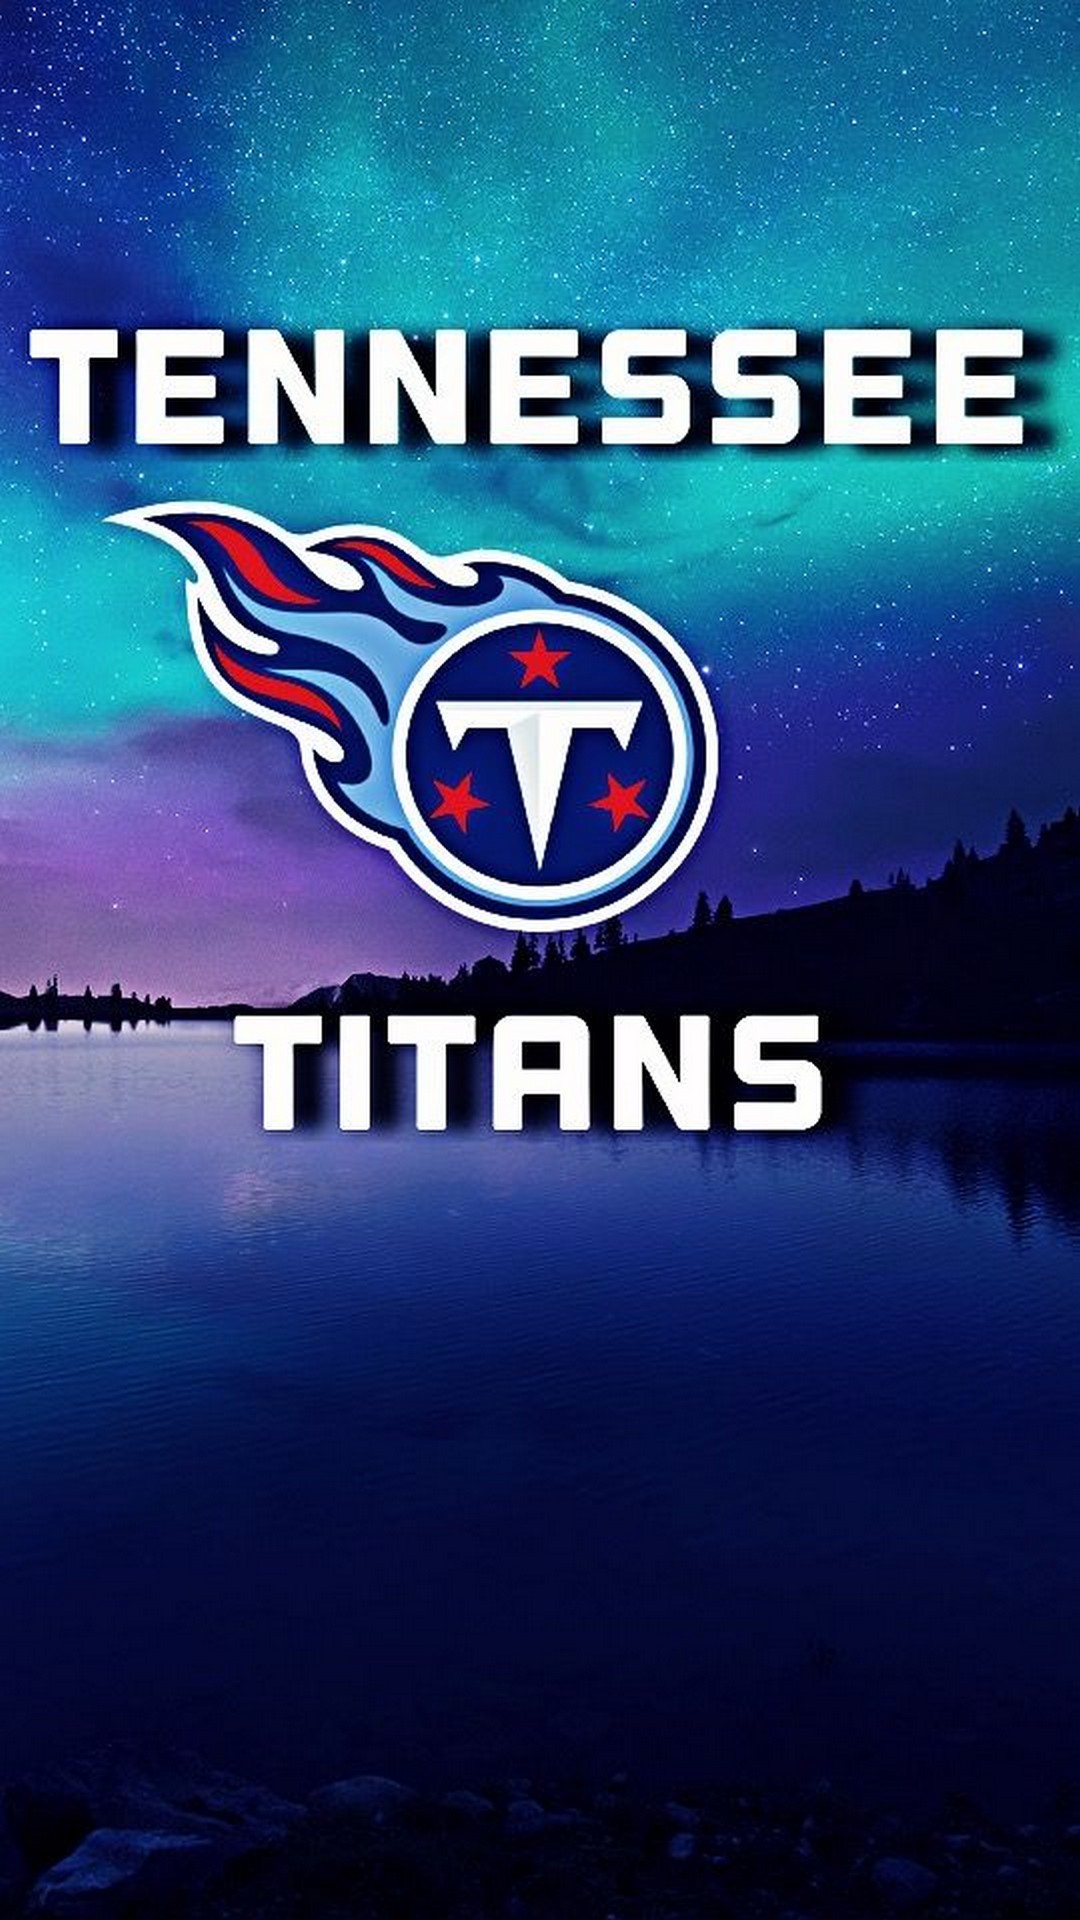 Tennessee Titans iPhone X Wallpaper with high-resolution 1080x1920 pixel. You can use this wallpaper for your Mac or Windows Desktop Background, iPhone, Android or Tablet and another Smartphone device